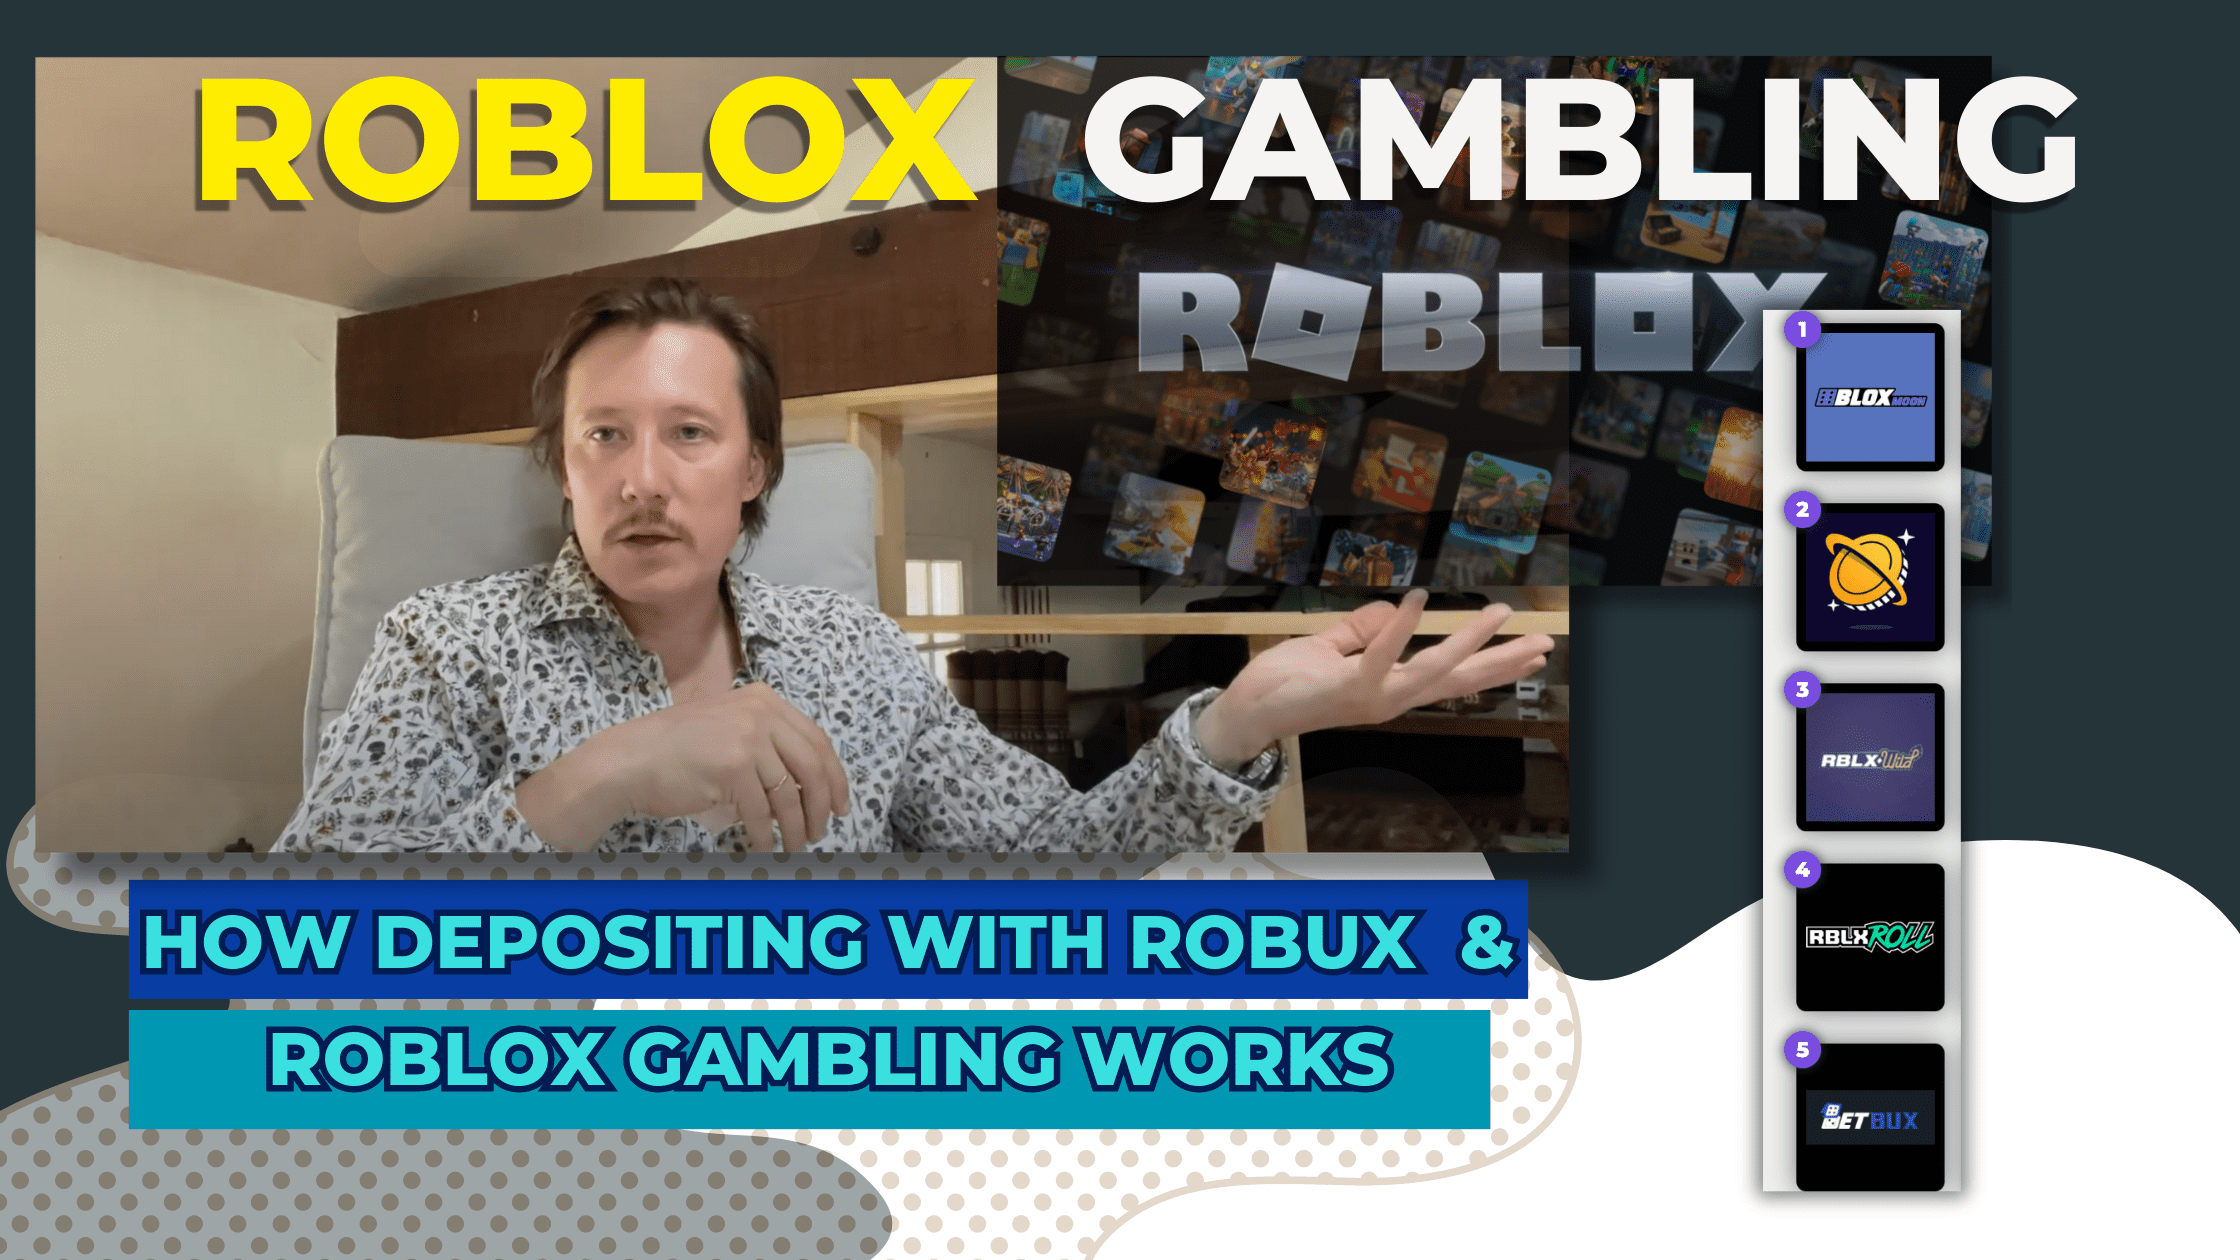 Roblox gambling: a Robux coins gambling. How it works for casinos and why it’s tolerated by Roblox? logotype